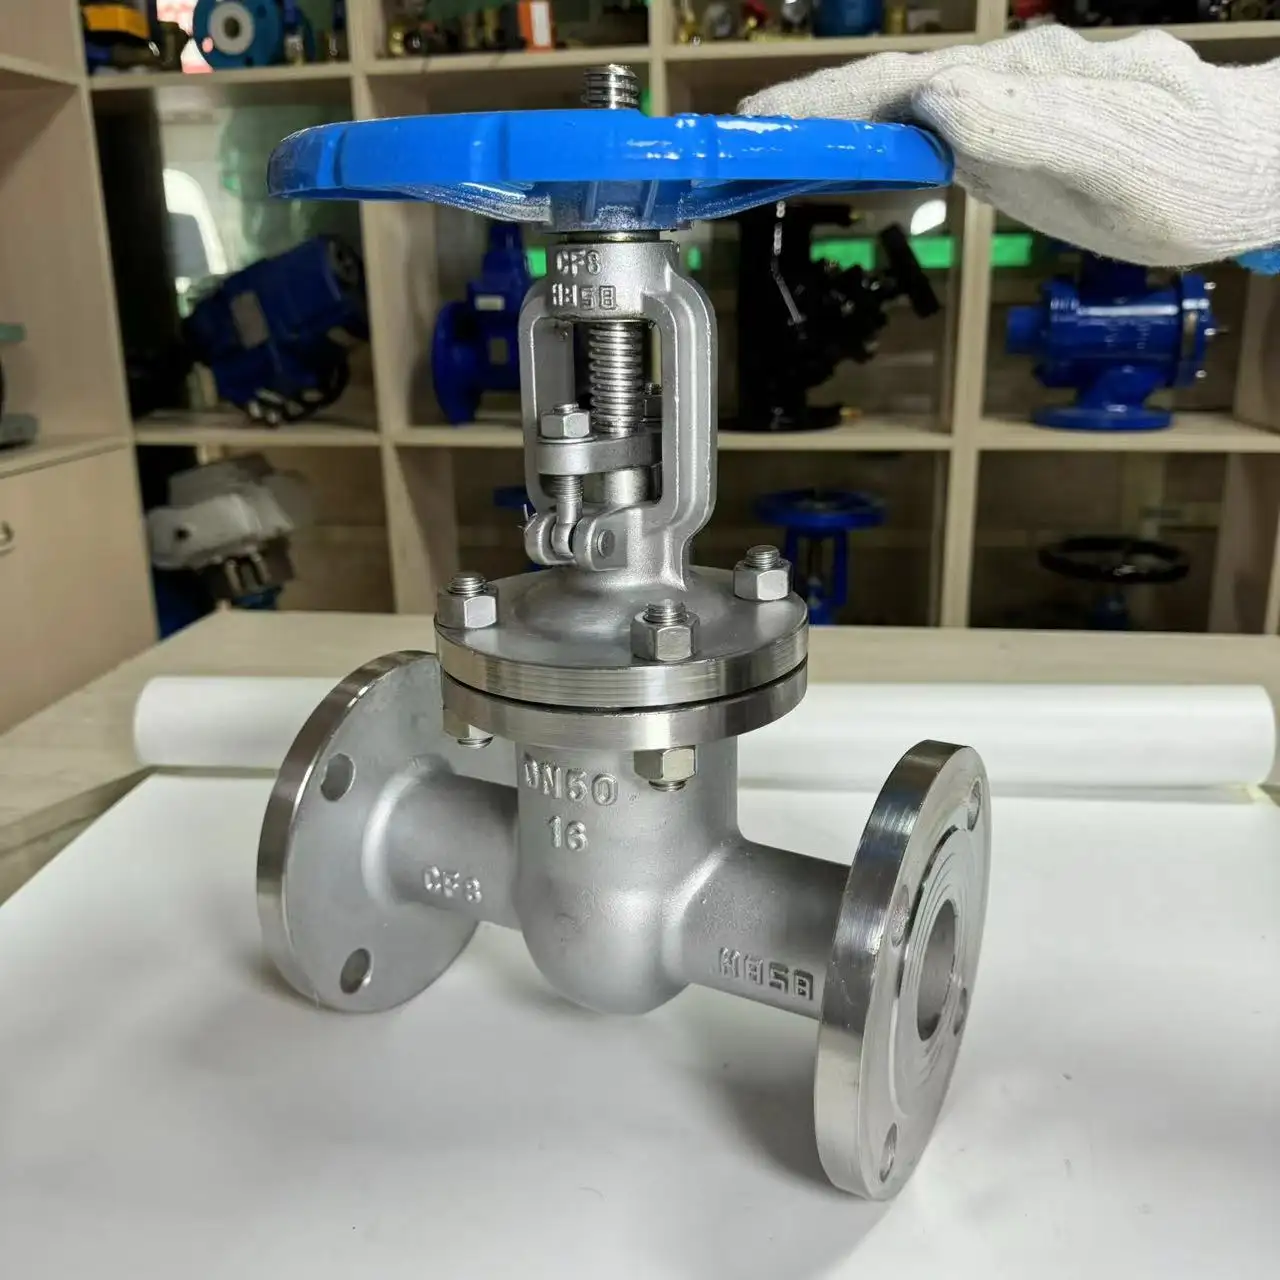 ANSI/API 150lb Stainless Steel 316 Carbon Alloy Oil Plant Flange Gate Valve with Hydraulic Cylinder